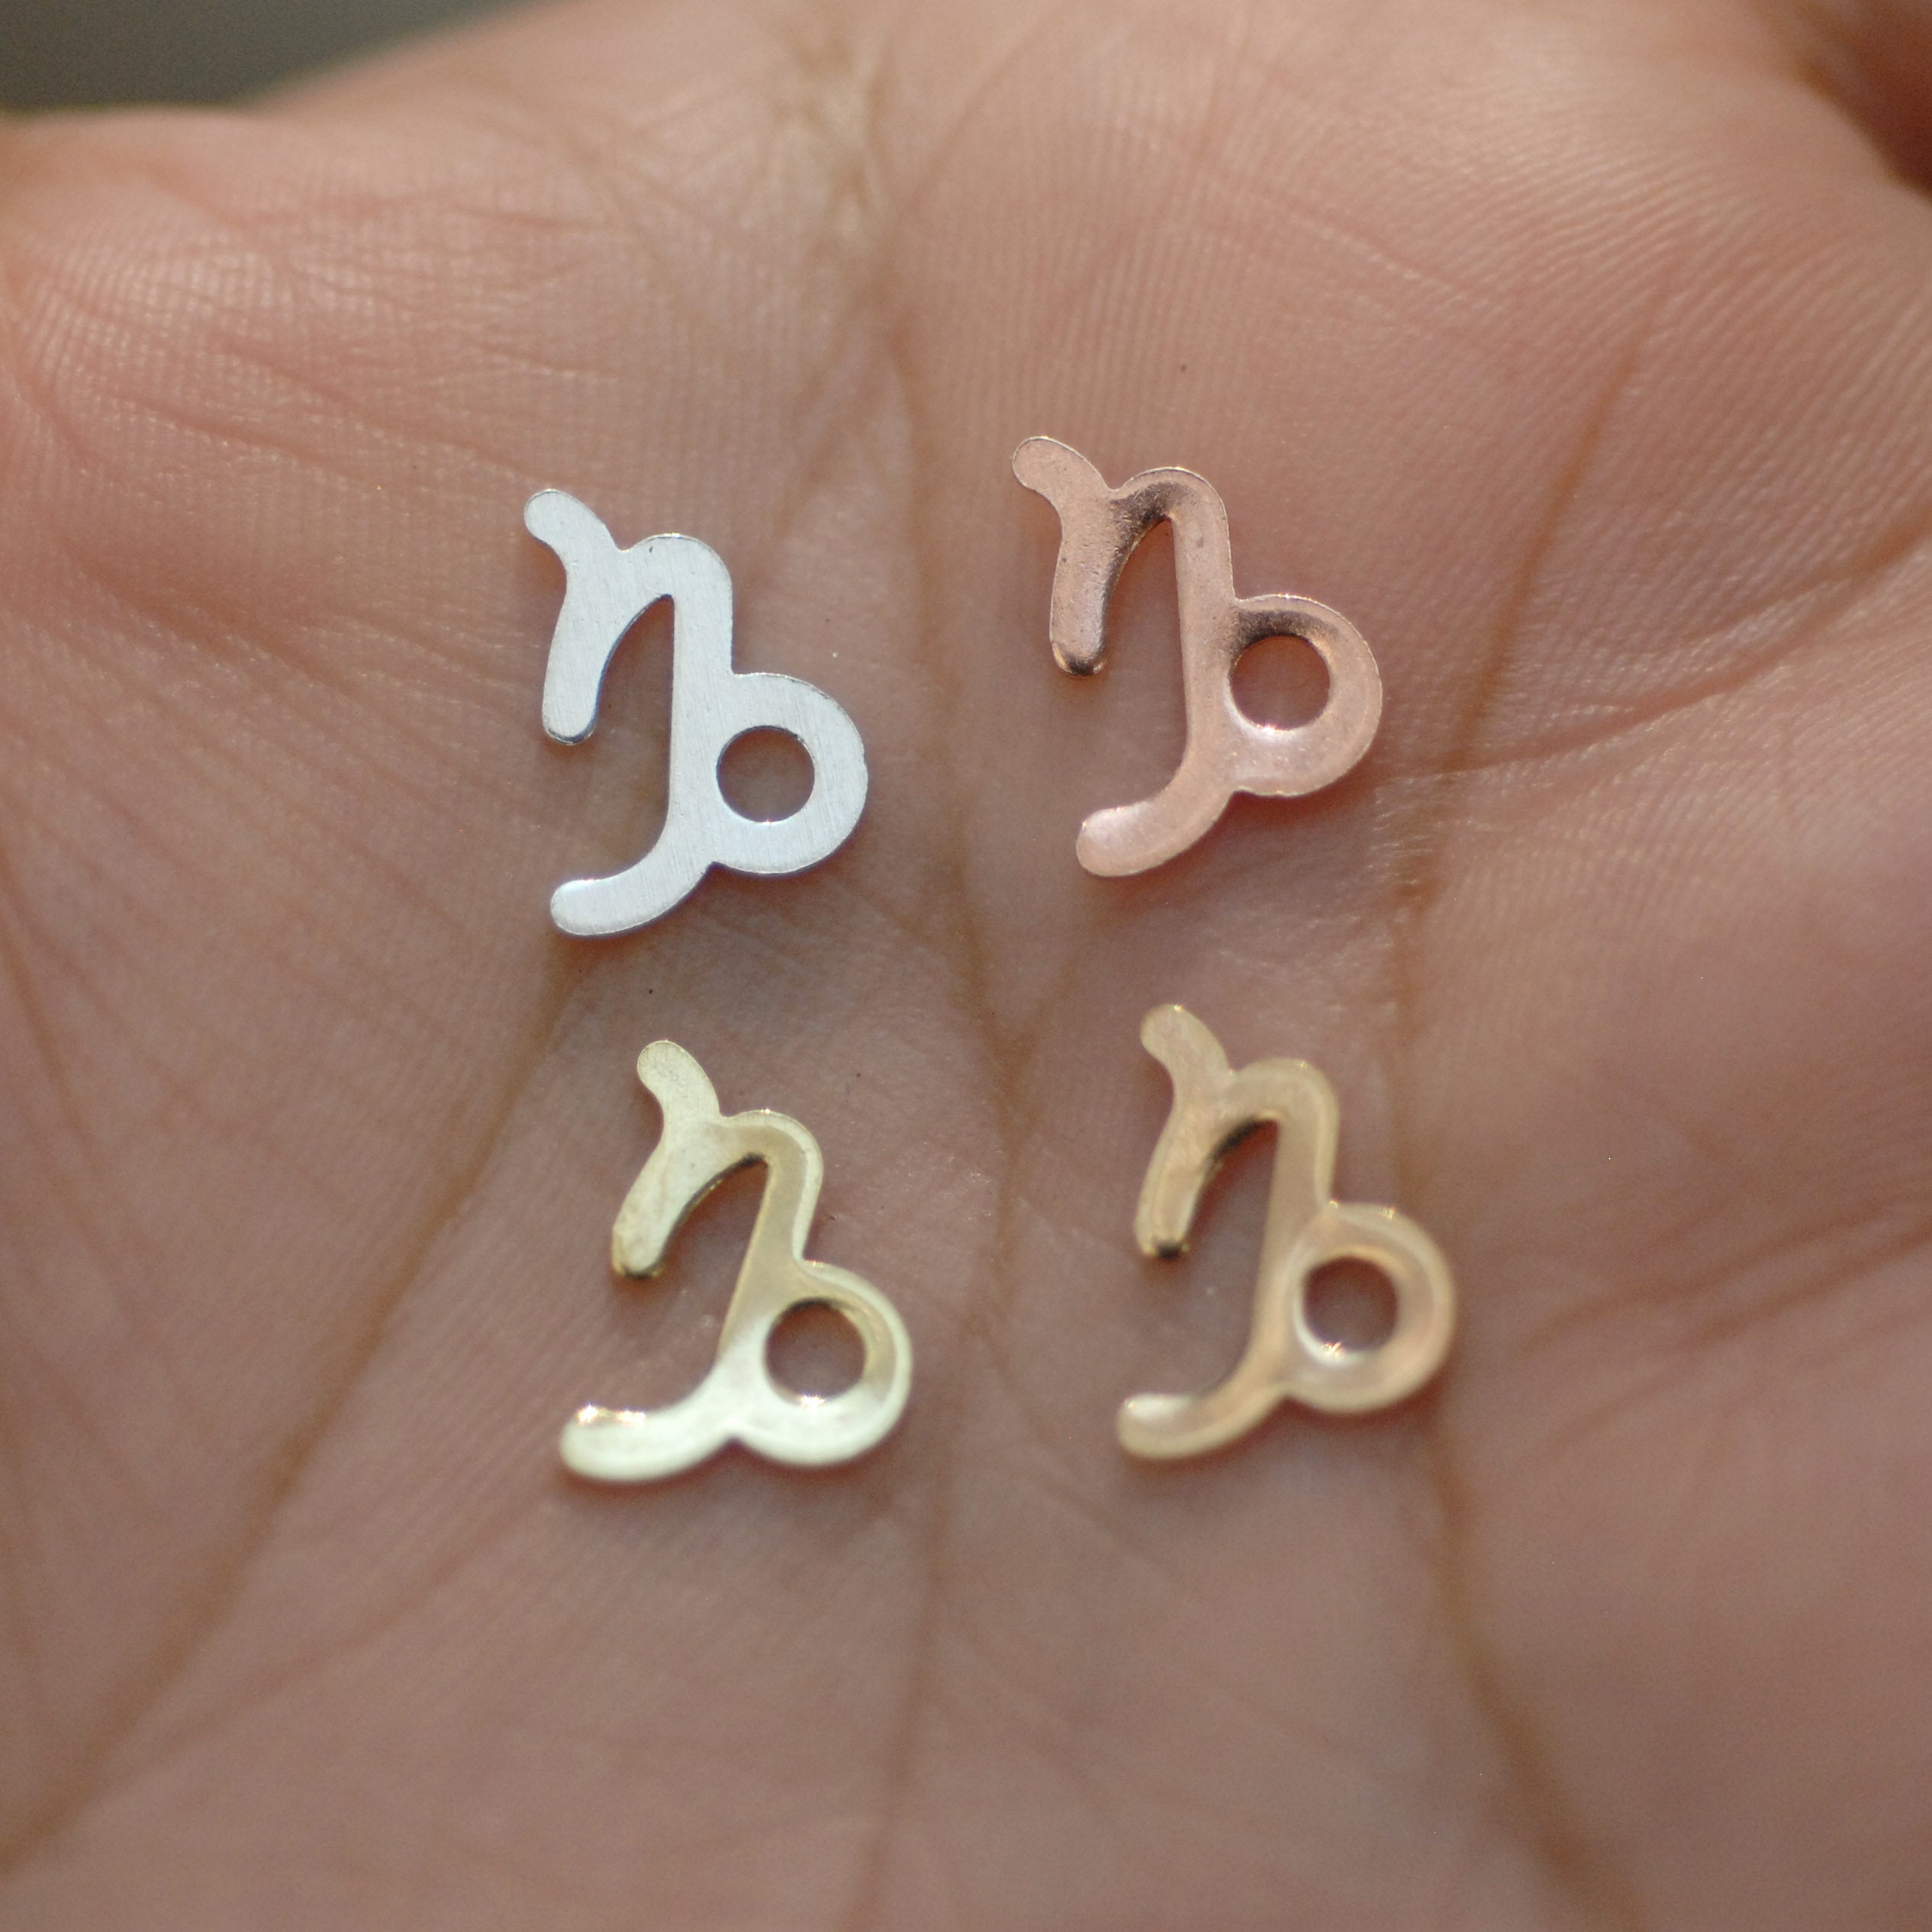 My MOST tiny Capricorn zodiac sign shapes 24g Mini miniature metal blanks for making jewelry copper, brass, bronze, sterling silver 925